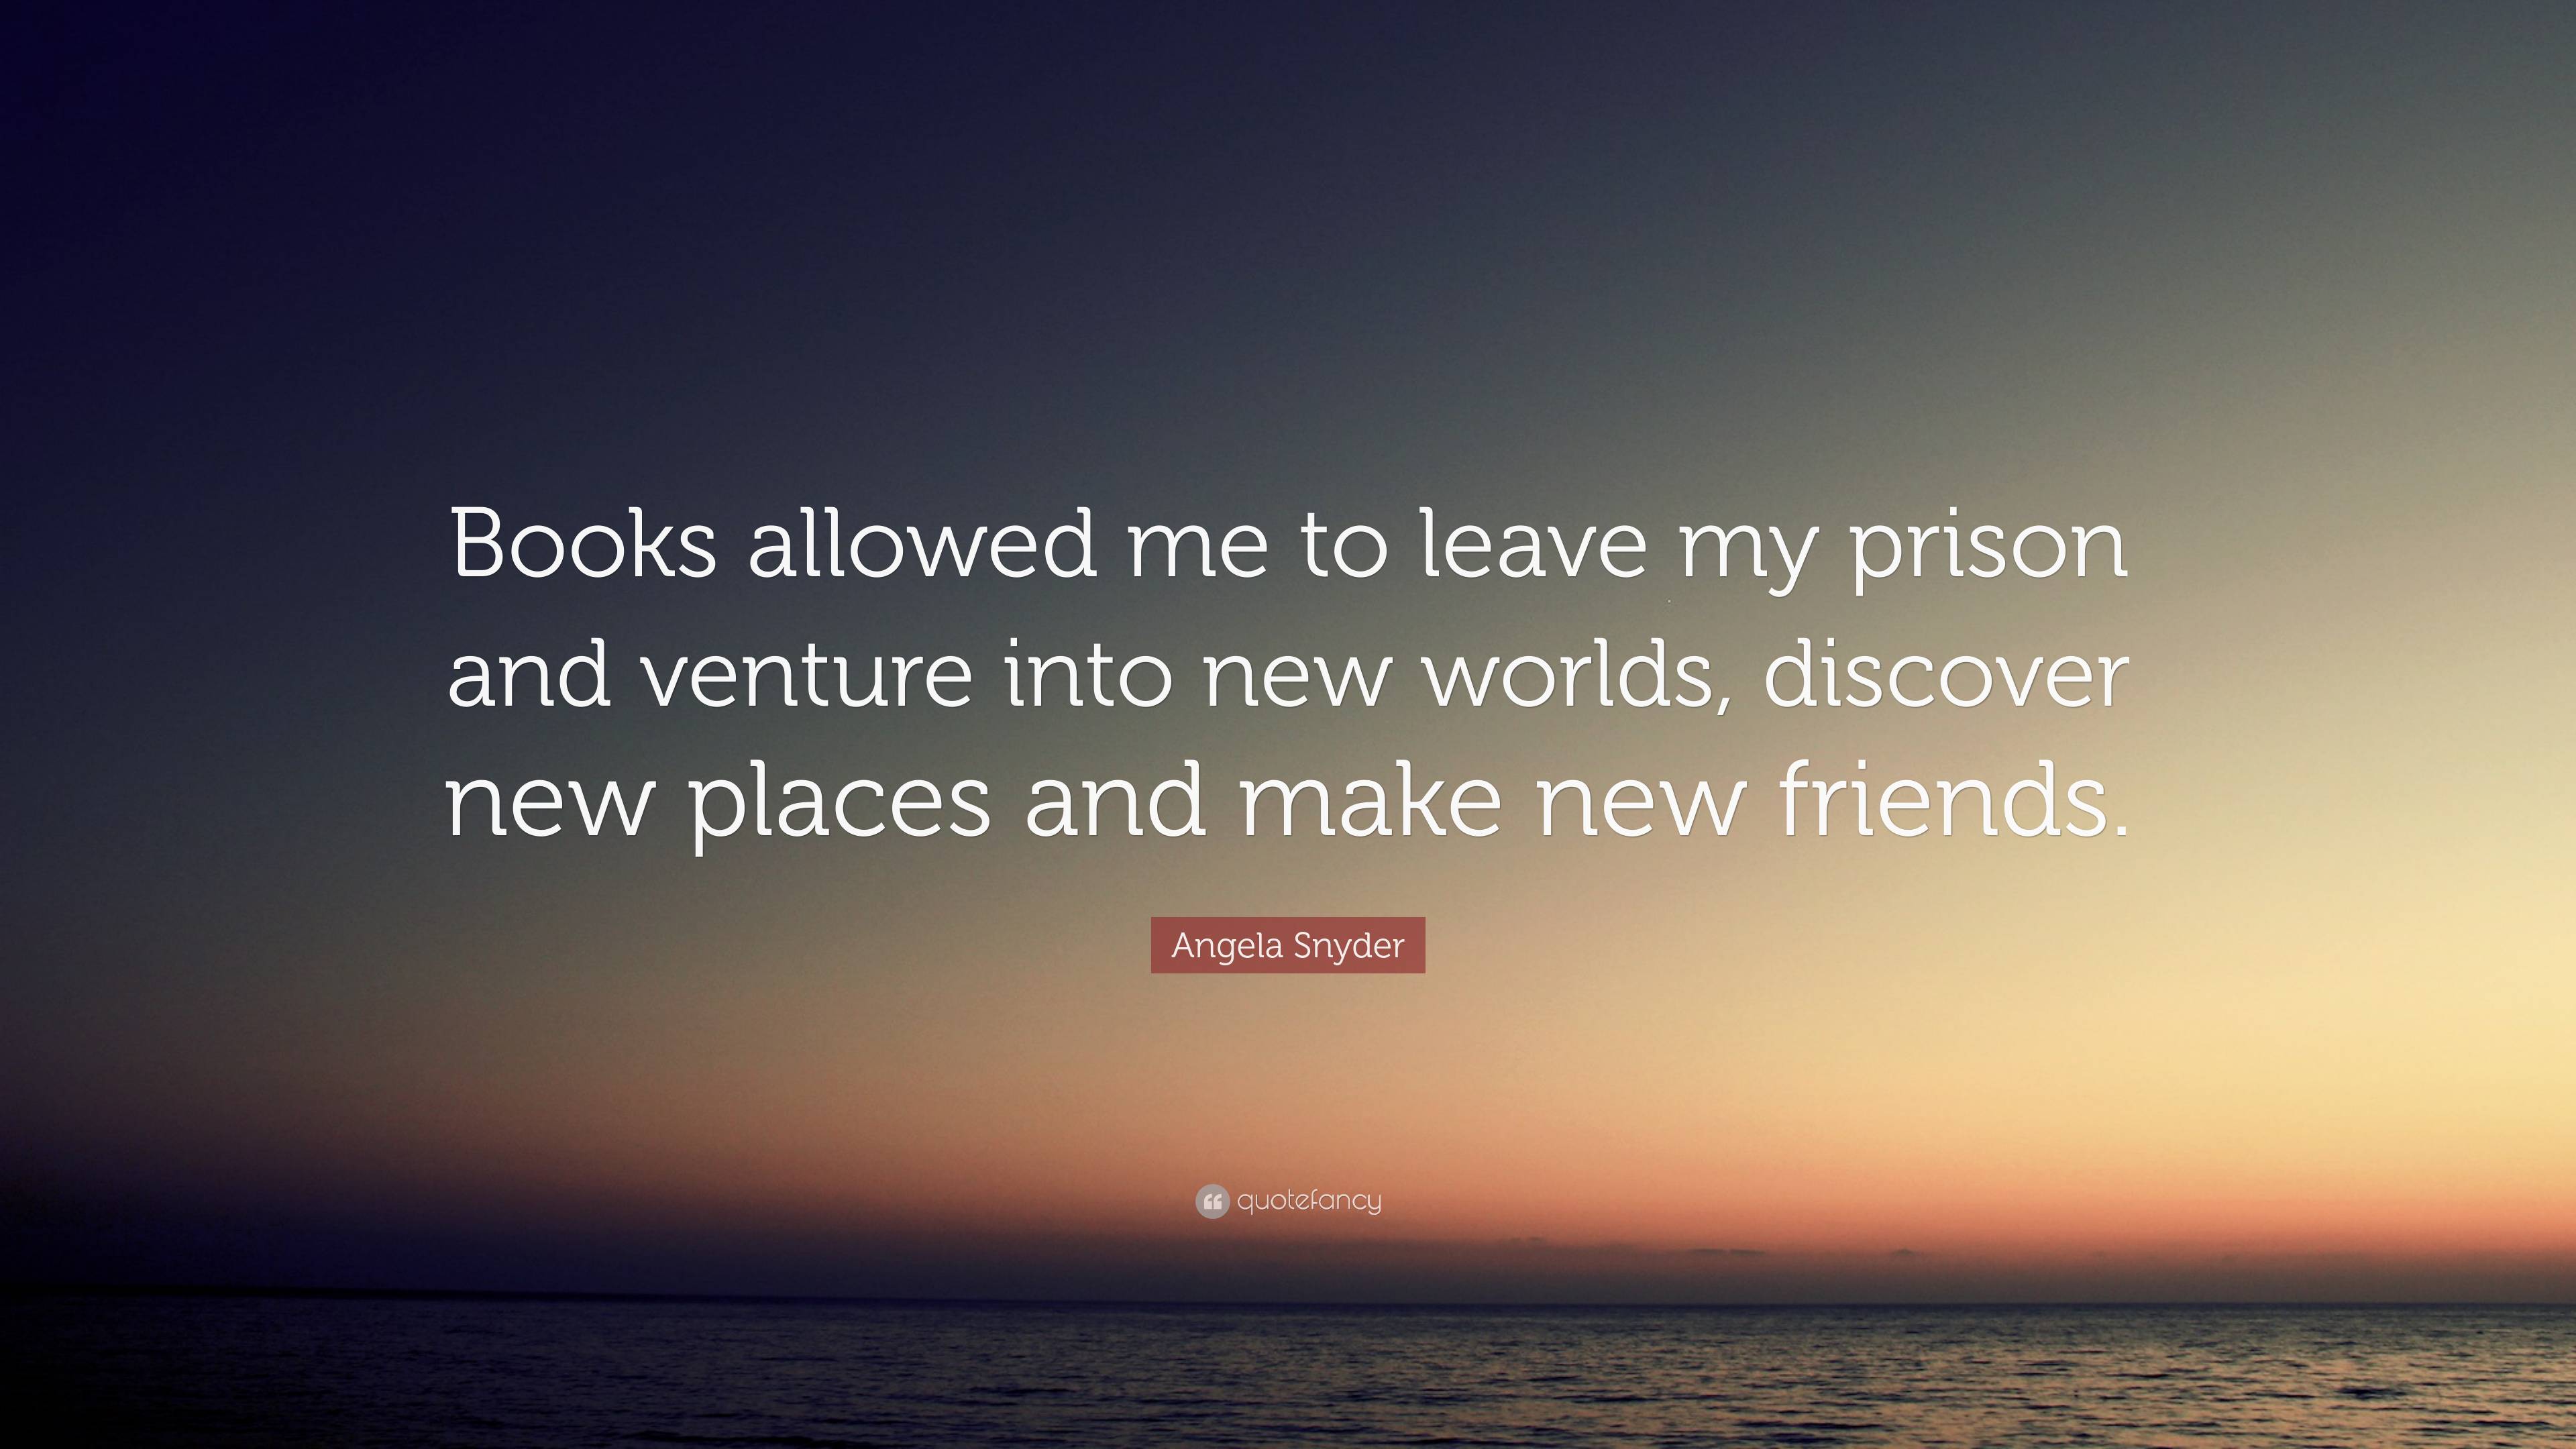 Angela Snyder Quote: “Books allowed me to leave my prison and venture ...